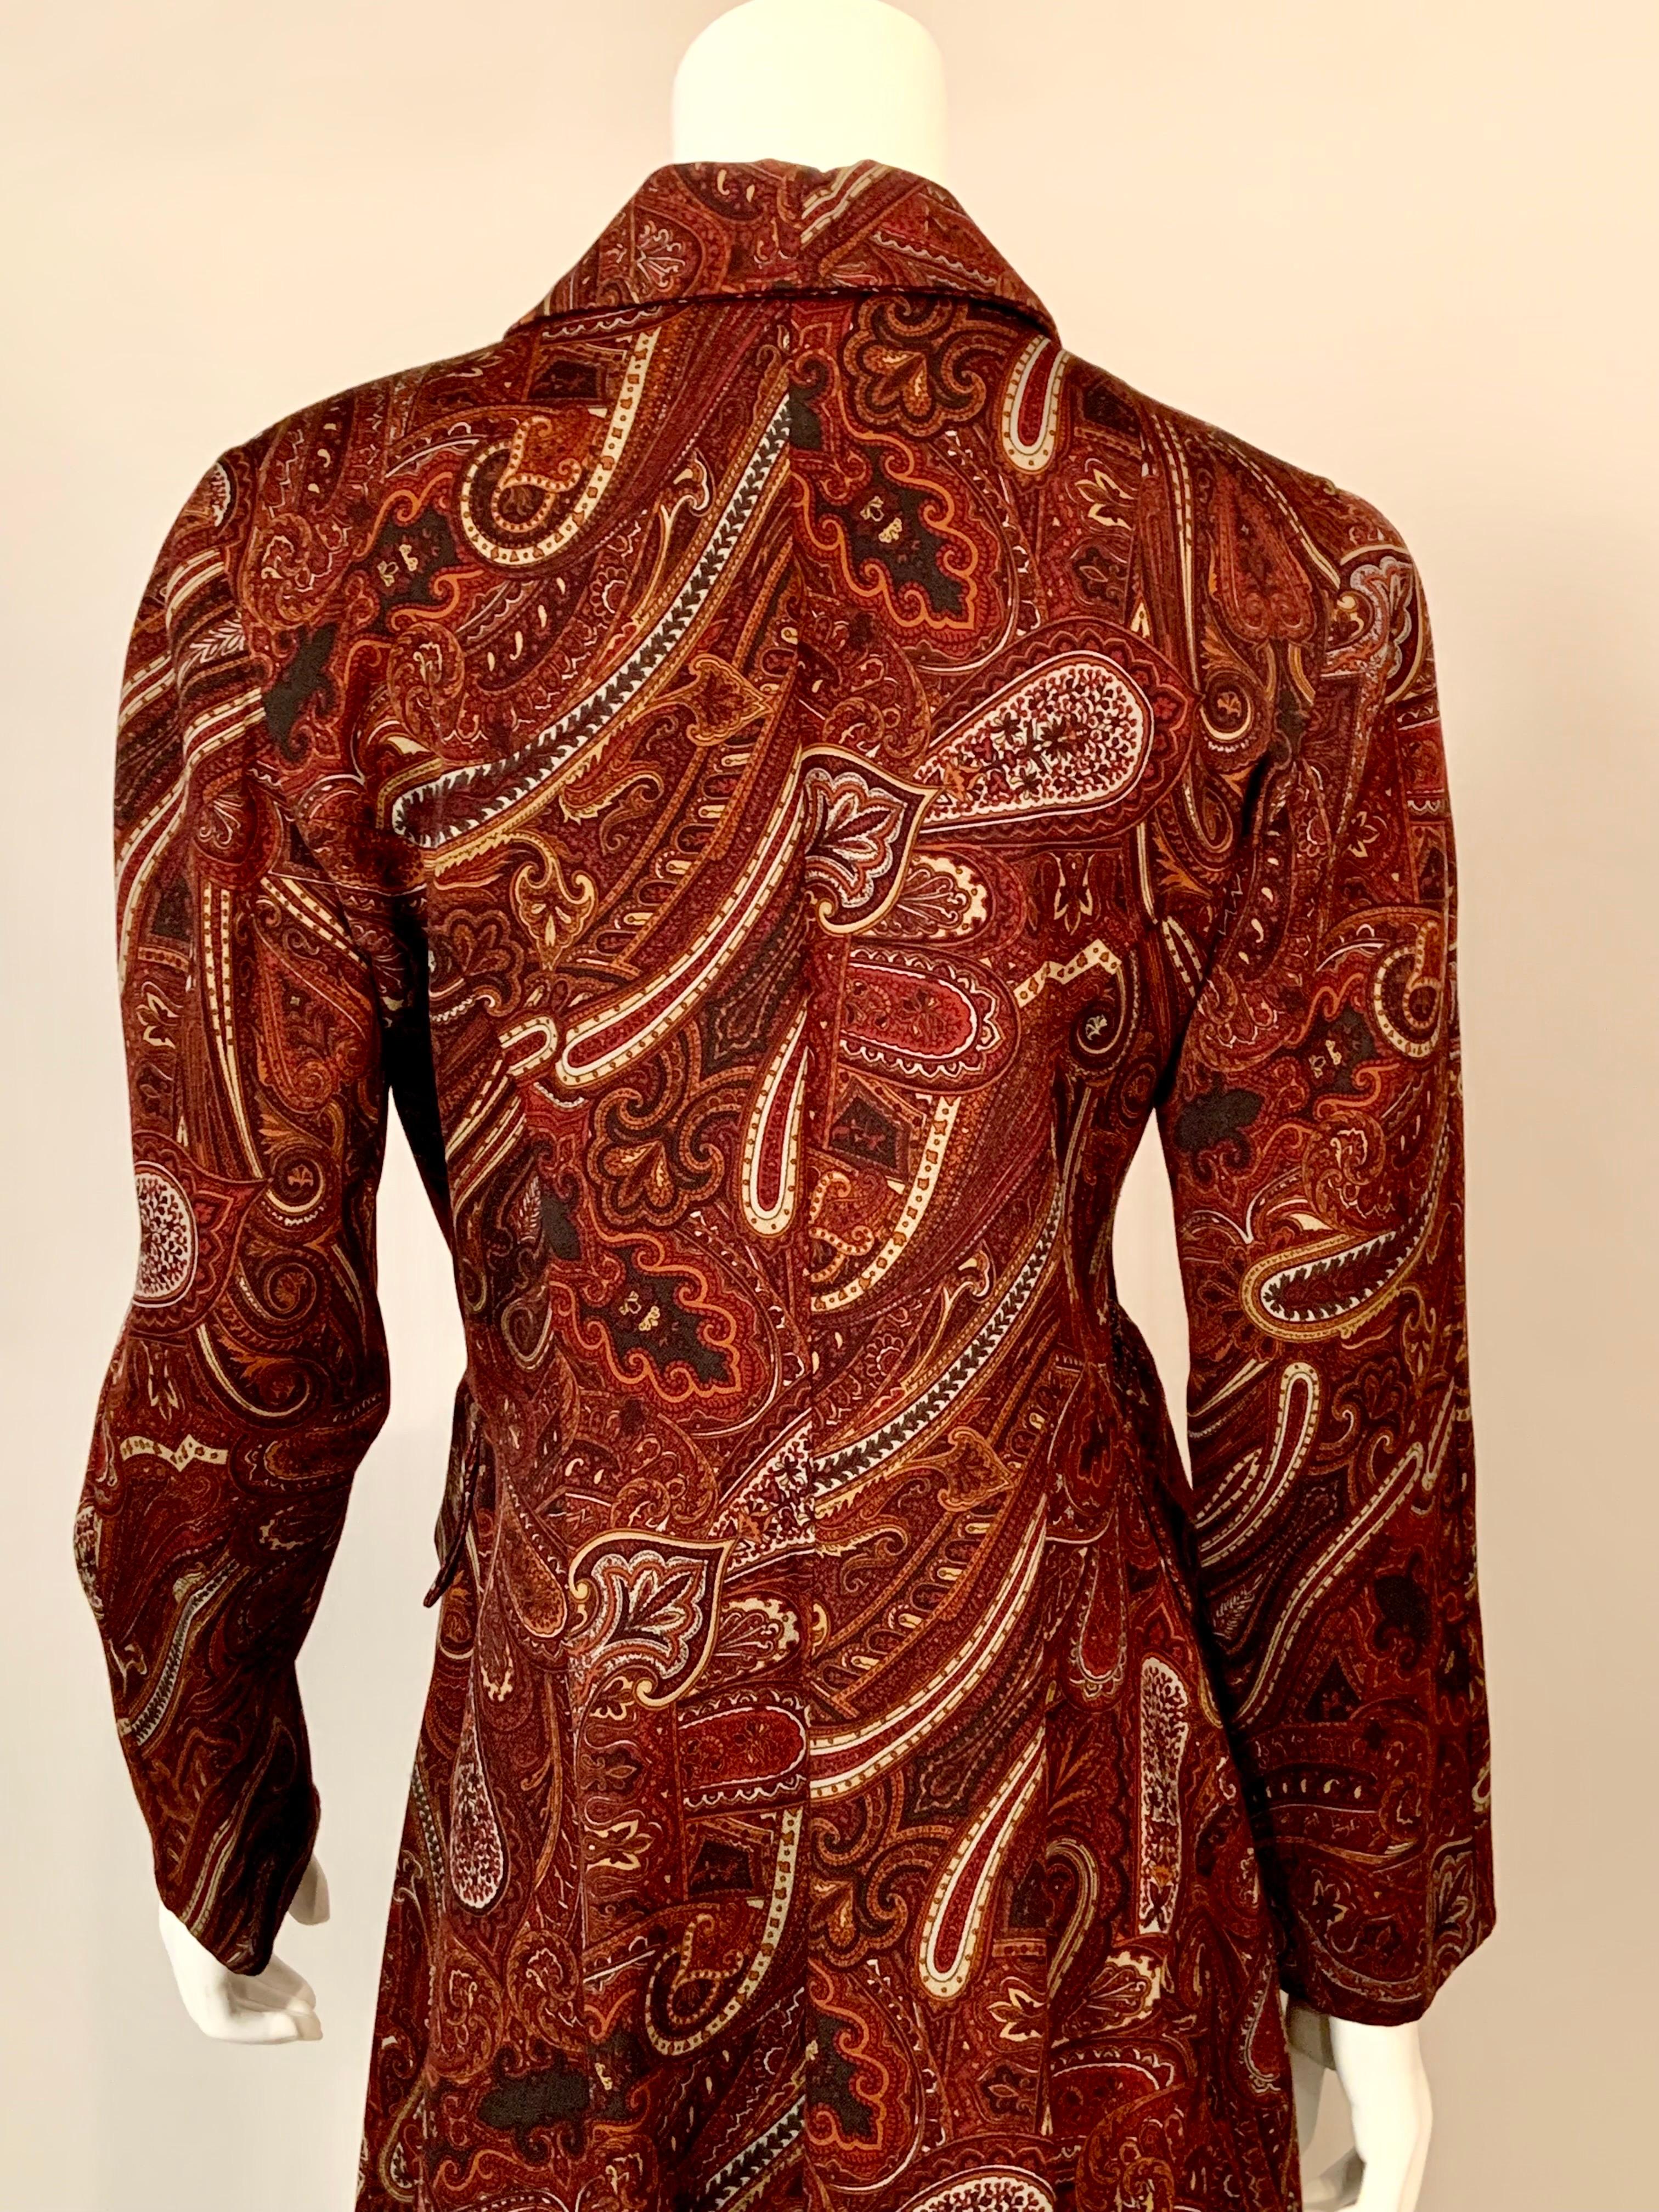 Bill Blass Paisley Patterned Coat in a Larger Size For Sale 4